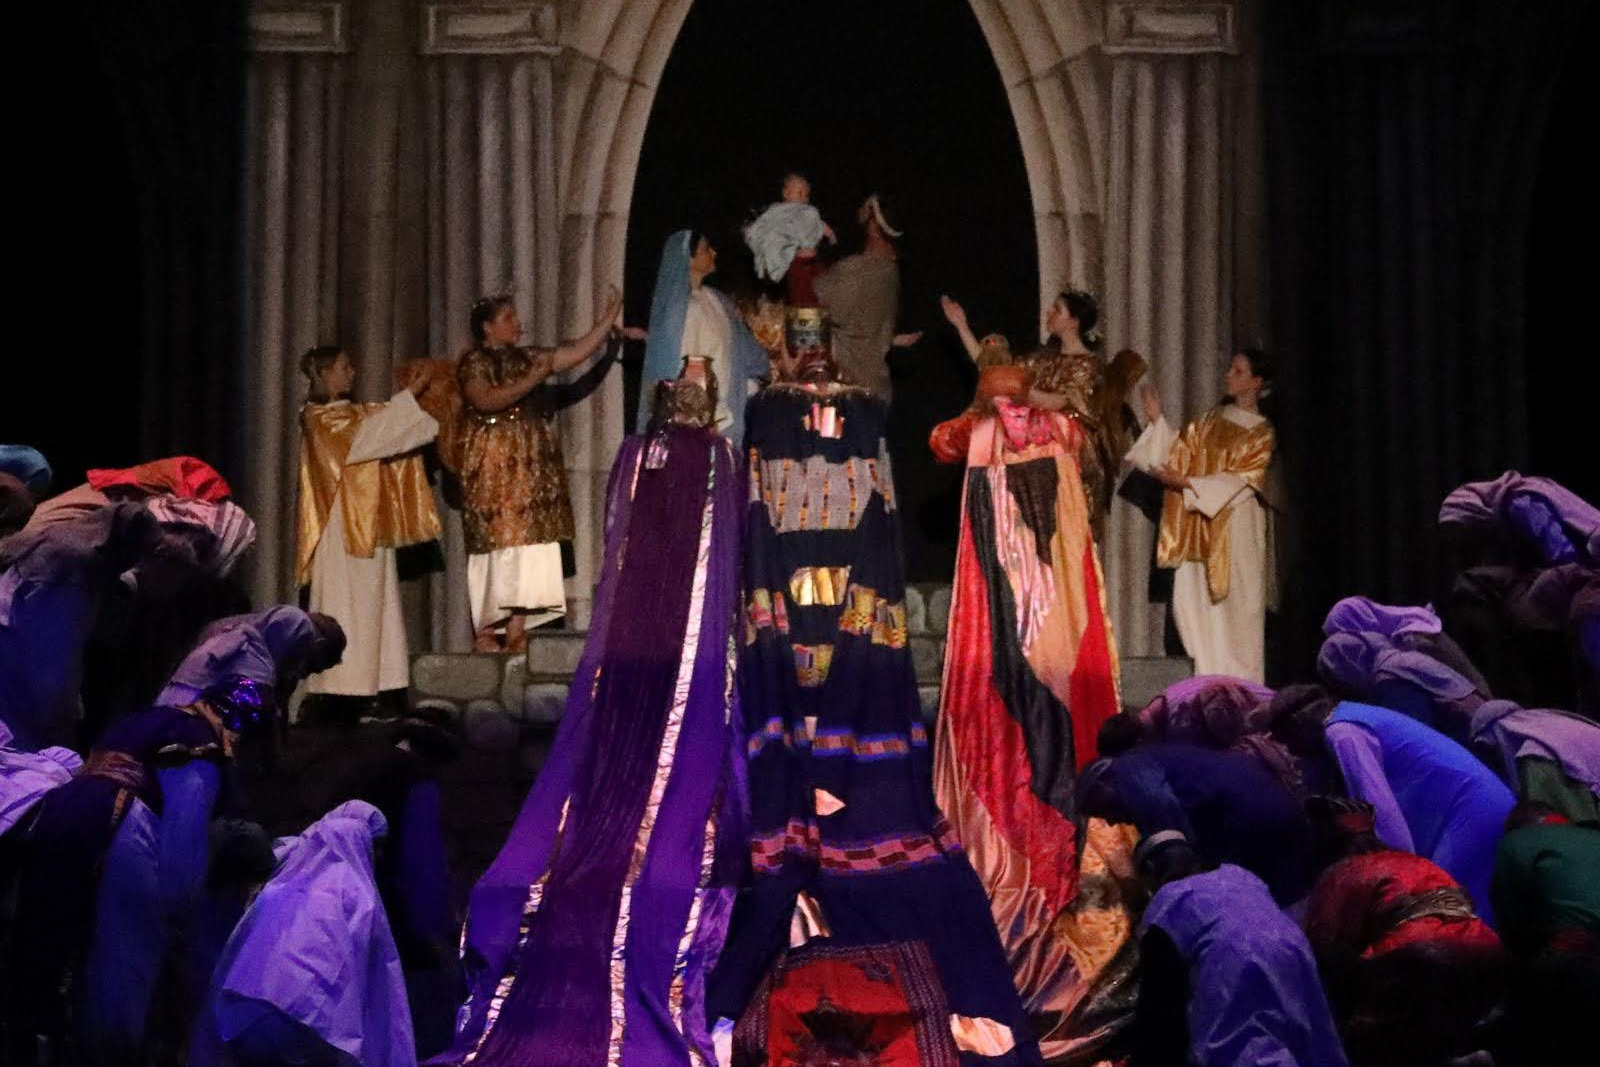 Joseph holds baby Jesus, Mary stands next to them with angels on either side.  Three kings in sumptous costumes and their entourages kneel before them.